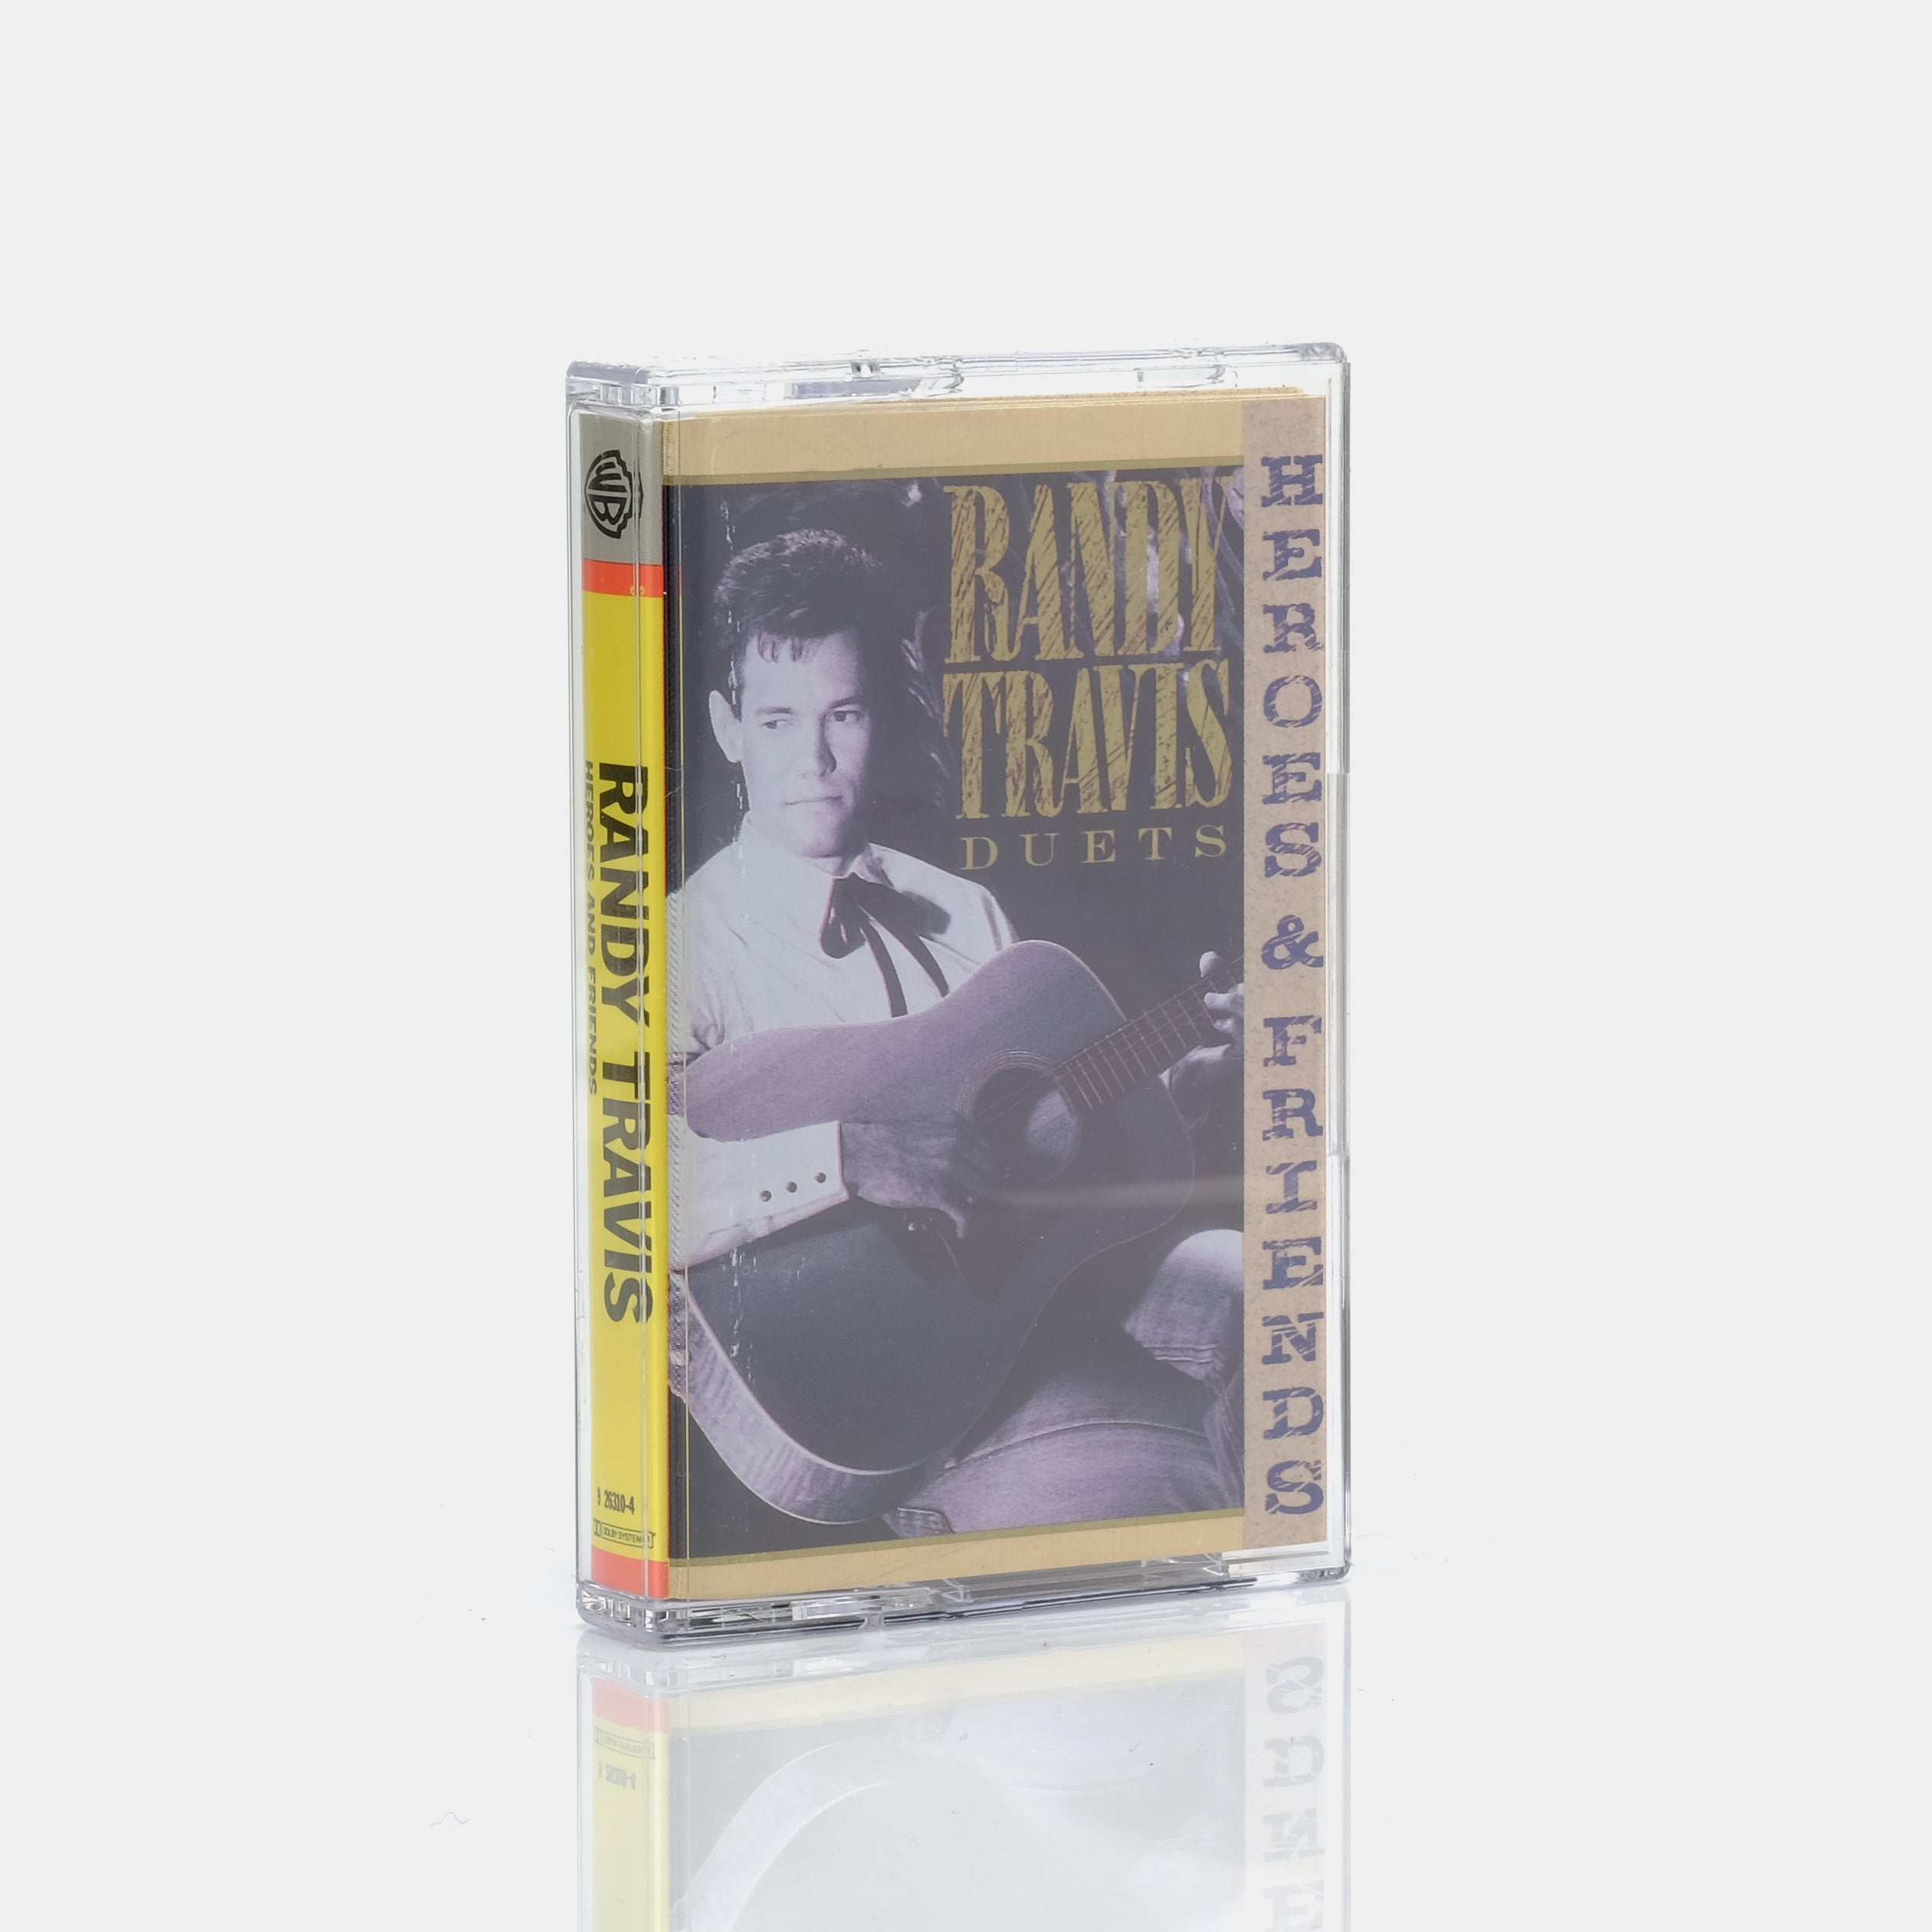 Randy Travis - Heroes And Friends Cassette Tape